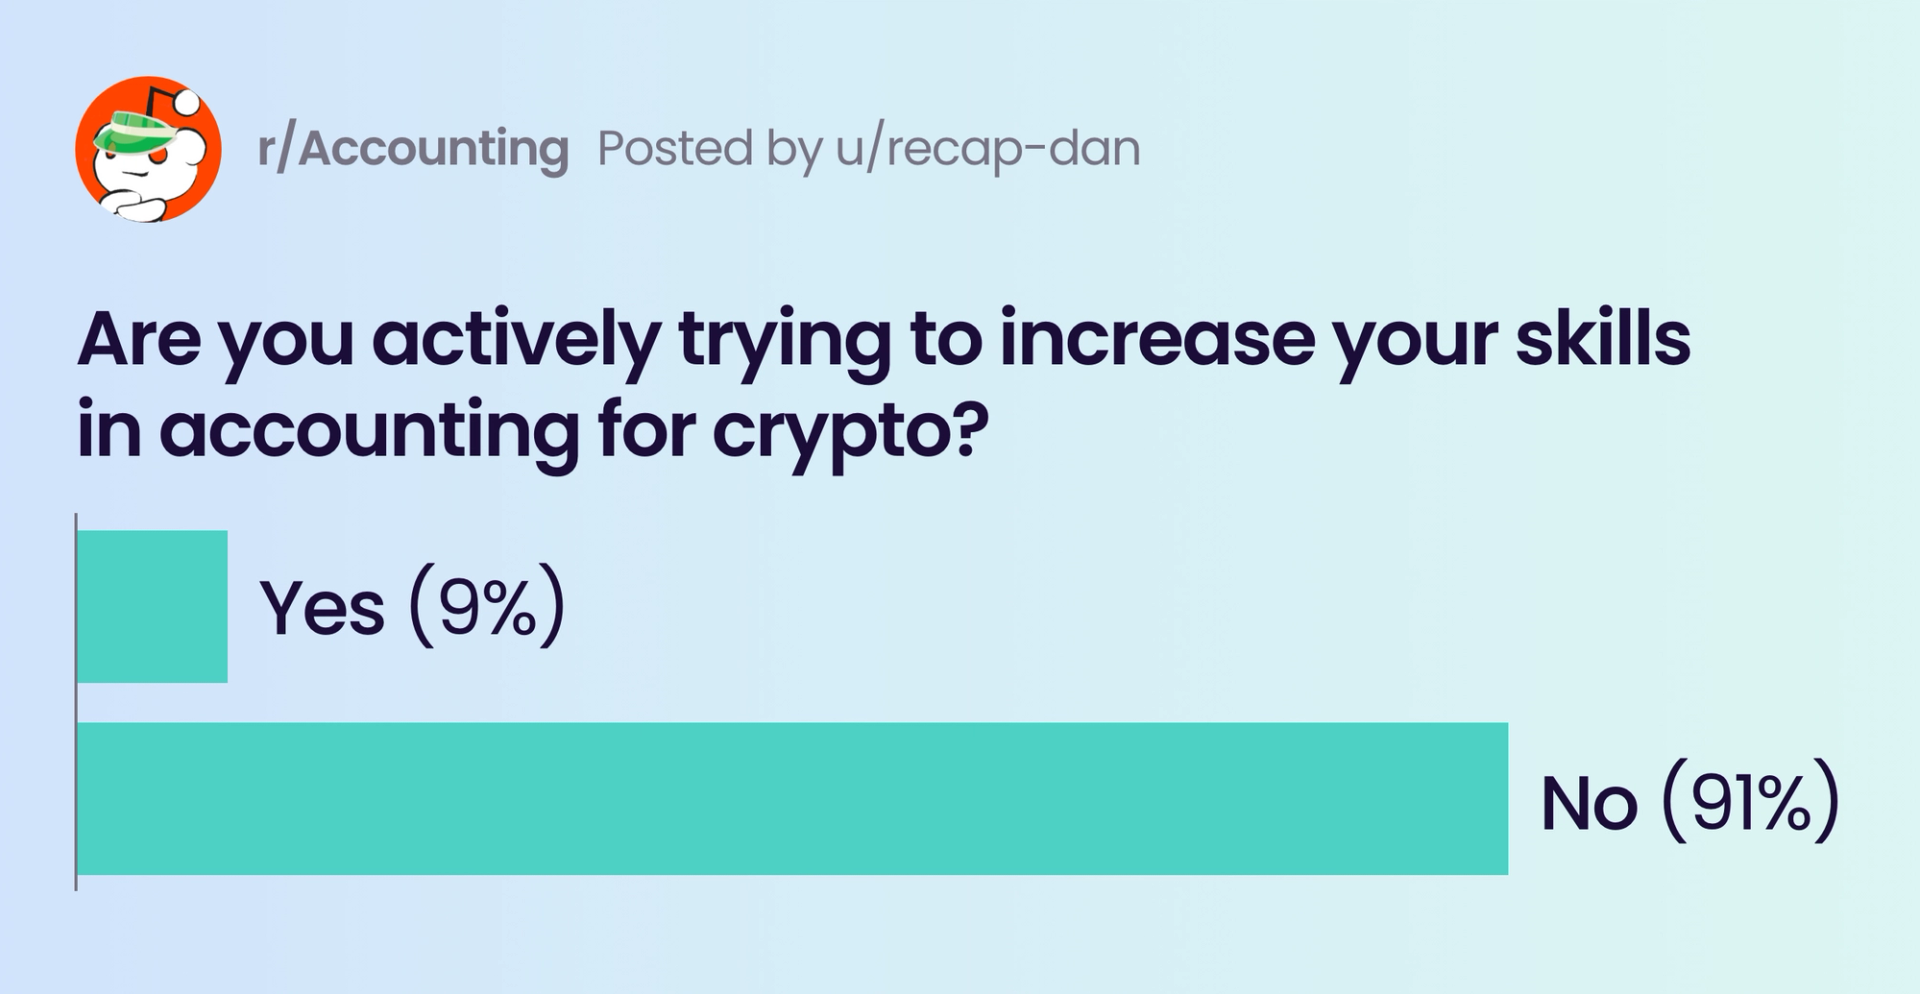 A chart "Are you actively trying to increase your skills in accounting for crypto?" Showing results of 9% Yes and 91% No